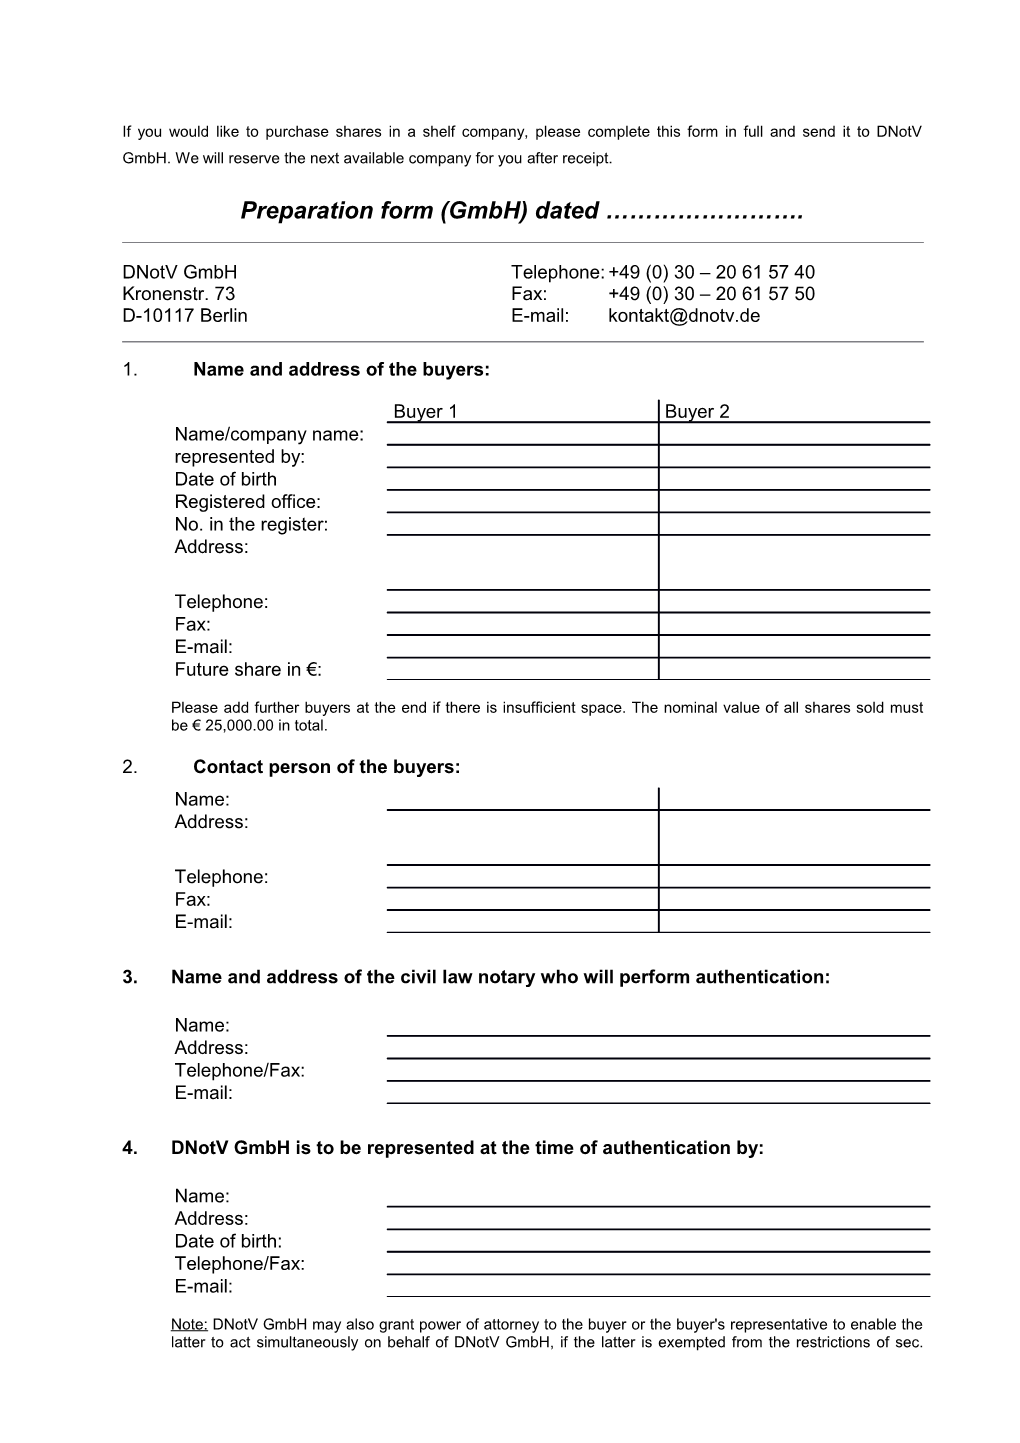 Preparation Form (Gmbh) Dated